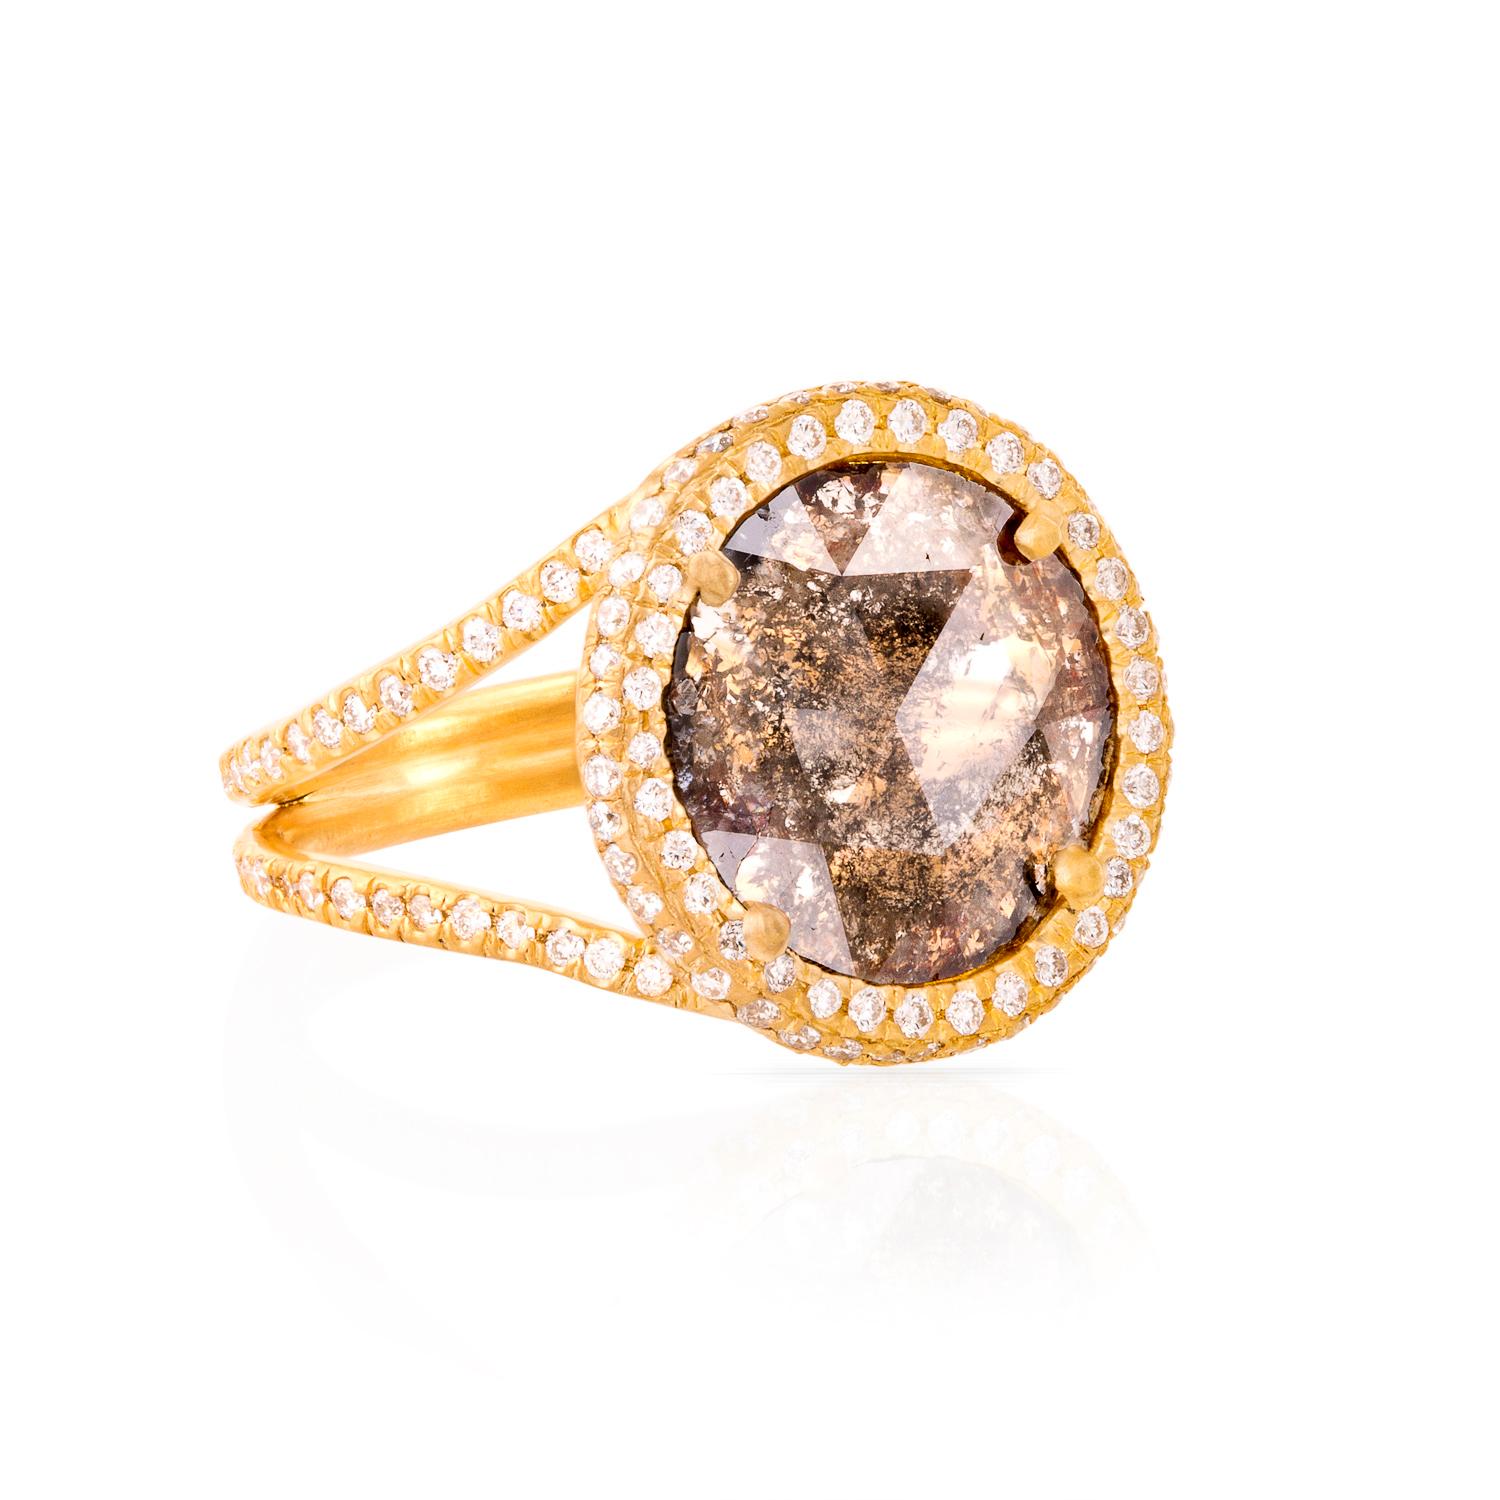 This 1.56 ct. Cognac Round Diamond Slice Ring has 0.67 ct. vs quality Diamond Pave set  in 18K Matte Yellow Gold. The double band has Diamond Pave 2/3 of the way around the band.  This piece is handmade in Los Angeles by master craftsmen.  All